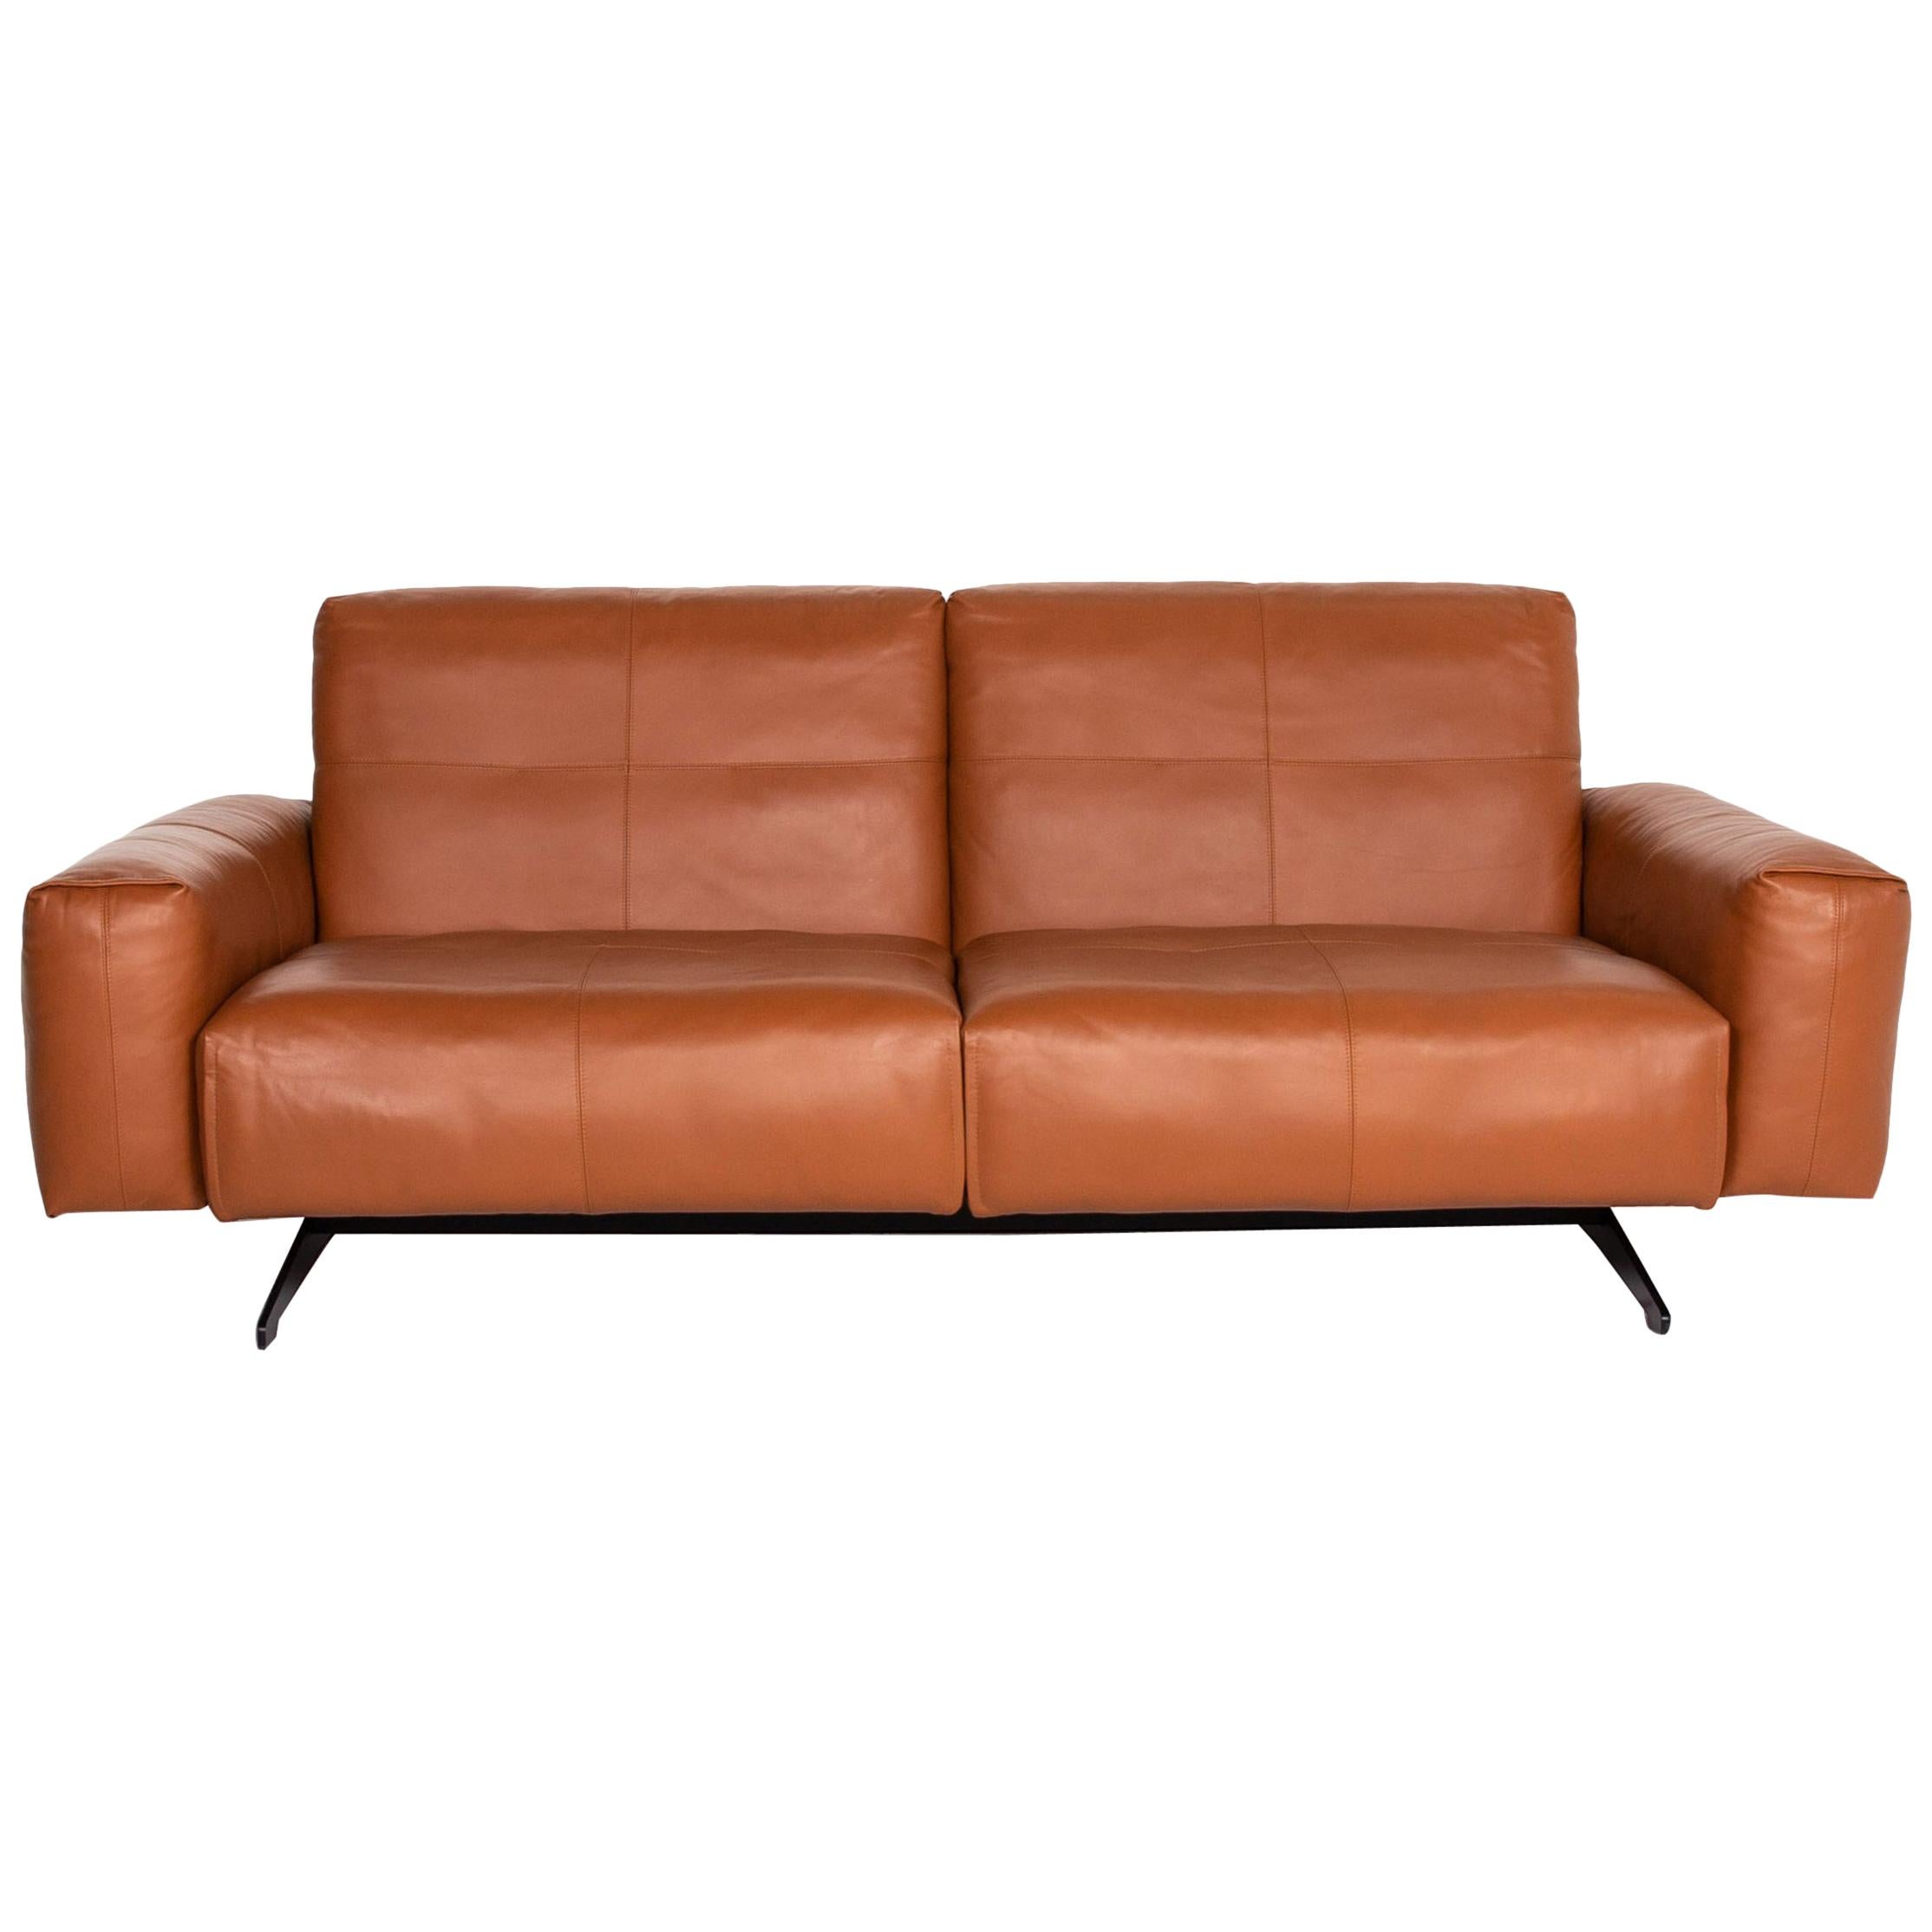 Rolf Benz 50 Leather Sofa Cognac Brown Three-Seat Function Couch